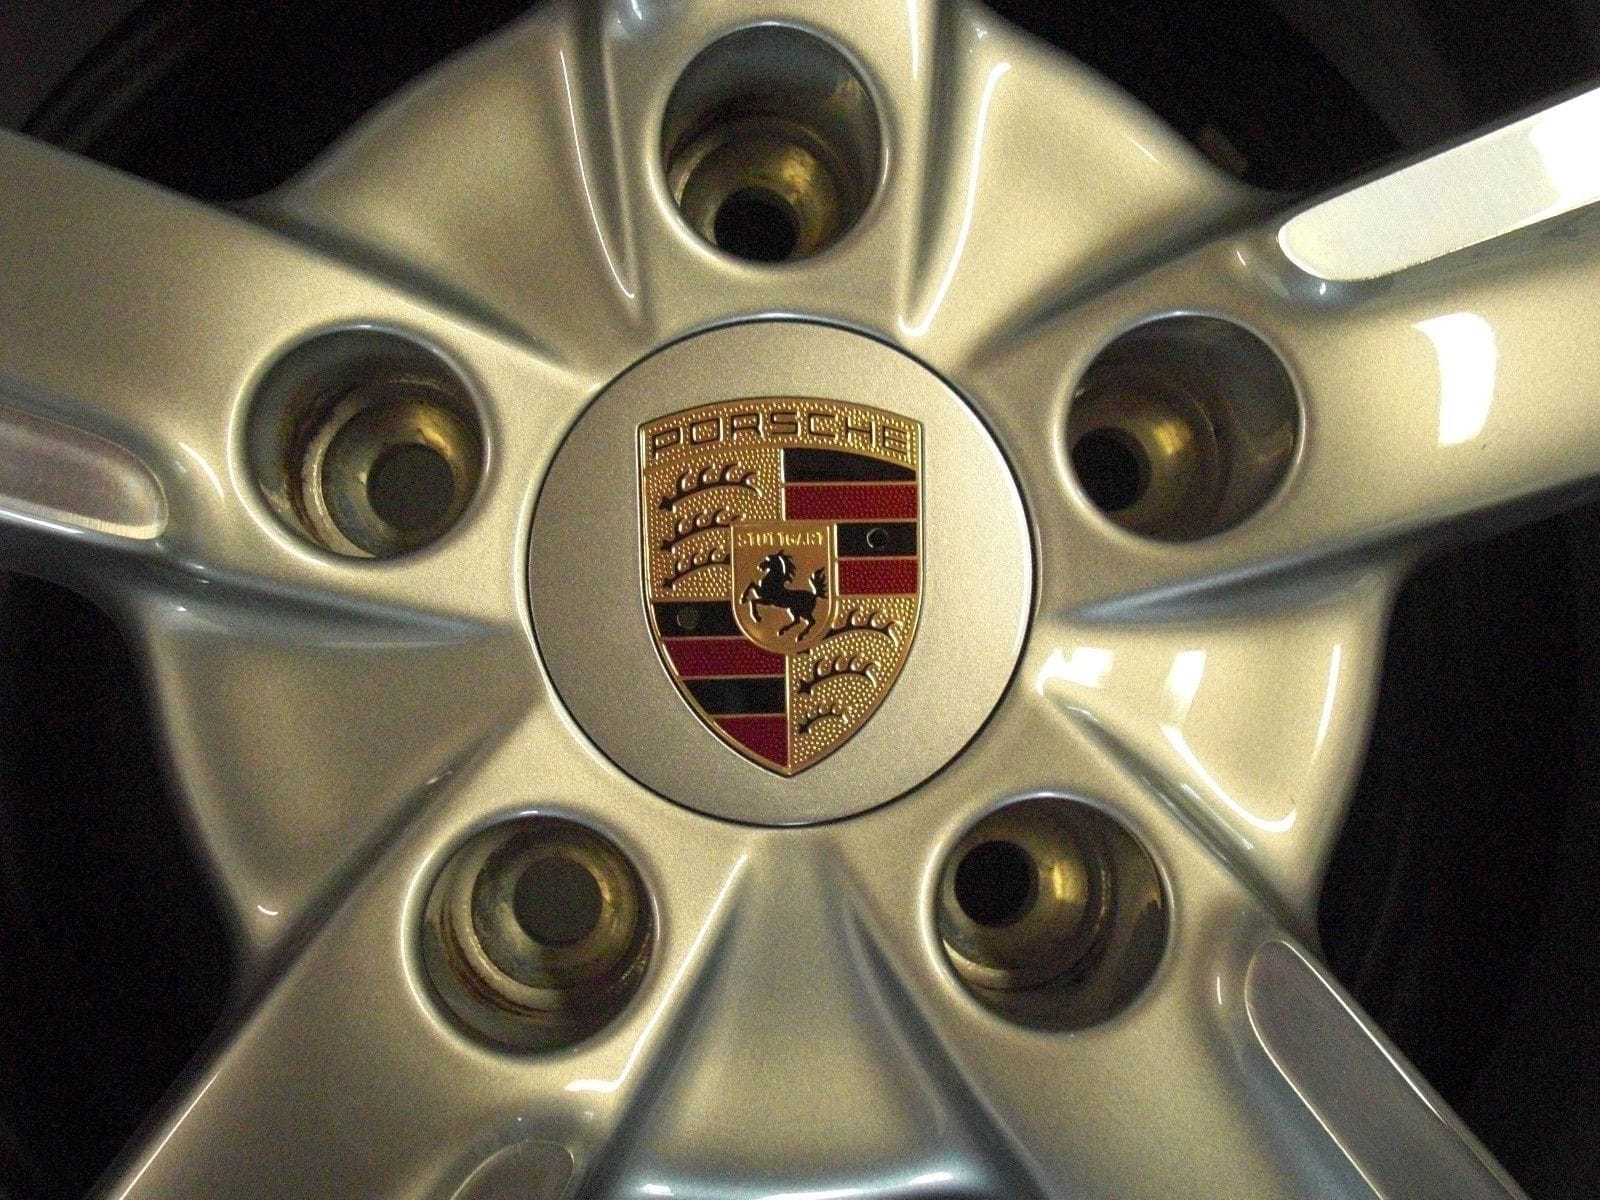 Wheels and Tires/Axles - Porsche 991 CarerraS 911 OEM 20" Sport Techno wheels with color crest center caps - Used - 2011 to 2019 Porsche 911 - Summit, NJ 07901, United States